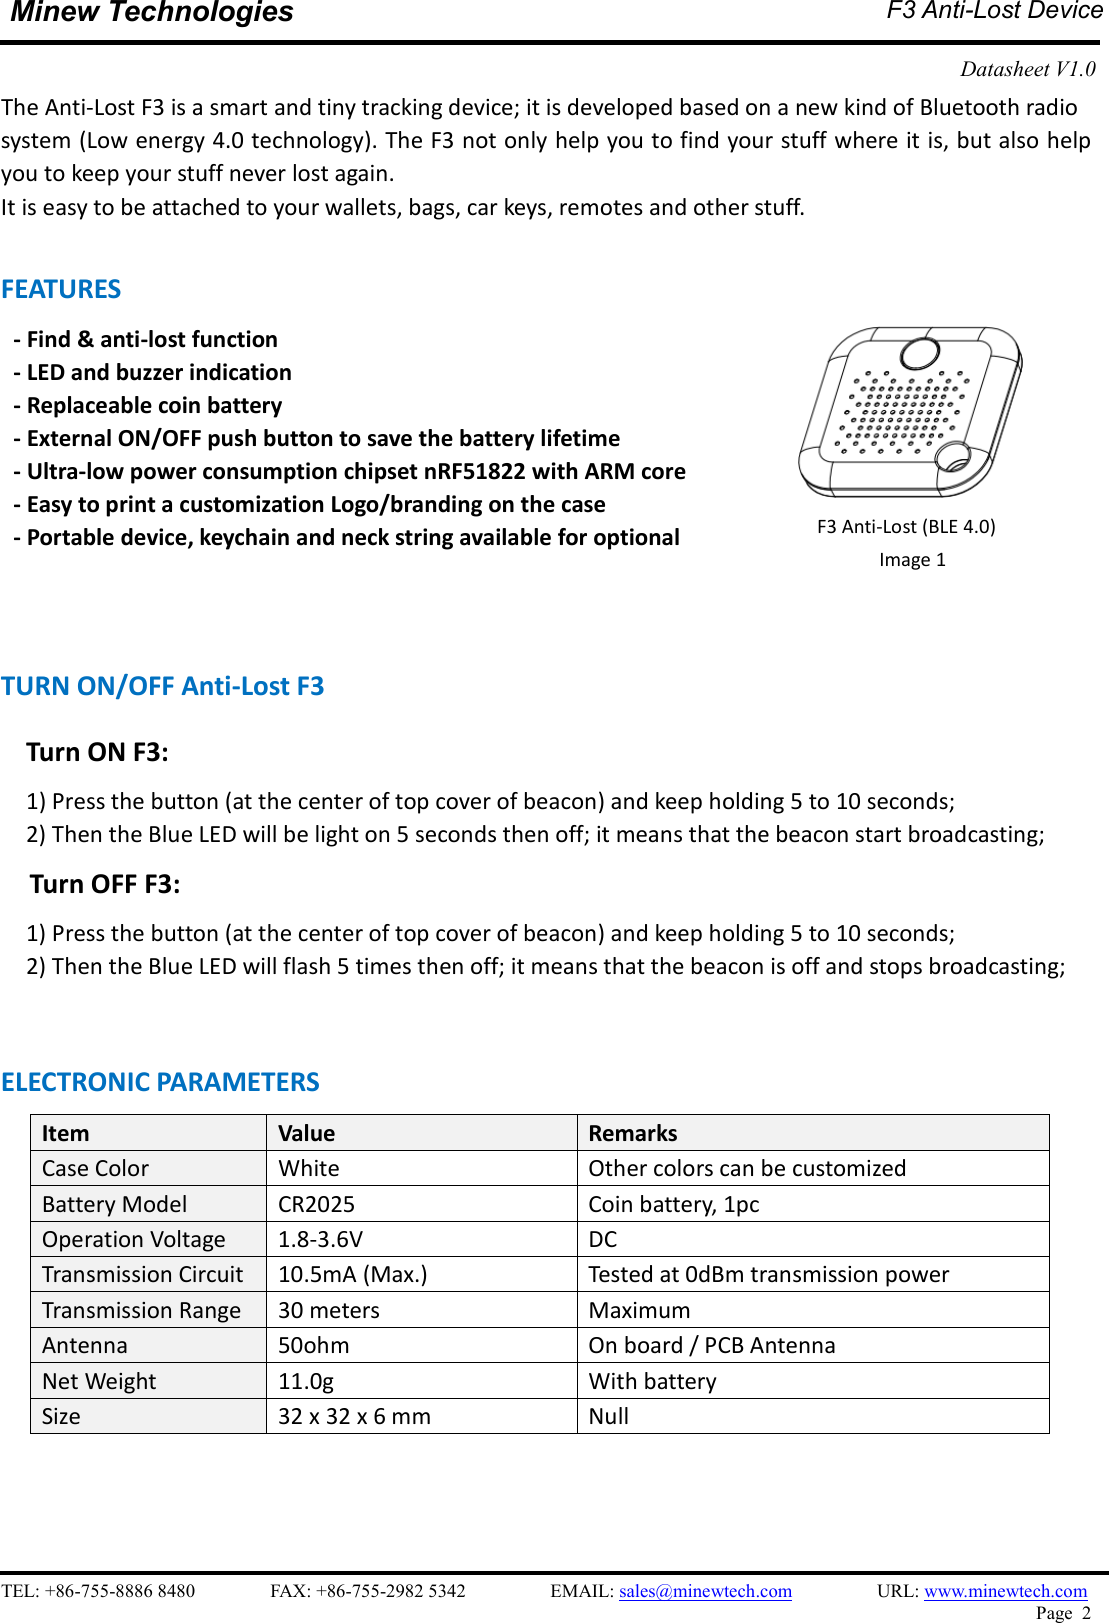    TEL: +86-755-8886 8480                FAX: +86-755-2982 5342                  EMAIL: sales@minewtech.com                  URL: www.minewtech.com Page  2  Minew Technologies  F3 Anti-Lost Device  Datasheet V1.0    The Anti-Lost F3 is a smart and tiny tracking device; it is developed based on a new kind of Bluetooth radio system (Low energy 4.0 technology). The F3 not only help you to find your stuff where it is, but also help you to keep your stuff never lost again. It is easy to be attached to your wallets, bags, car keys, remotes and other stuff.  FEATURES   - Find &amp; anti-lost function - LED and buzzer indication - Replaceable coin battery - External ON/OFF push button to save the battery lifetime - Ultra-low power consumption chipset nRF51822 with ARM core - Easy to print a customization Logo/branding on the case - Portable device, keychain and neck string available for optional    TURN ON/OFF Anti-Lost F3     Turn ON F3:   1) Press the button (at the center of top cover of beacon) and keep holding 5 to 10 seconds;     2) Then the Blue LED will be light on 5 seconds then off; it means that the beacon start broadcasting; Turn OFF F3:   1) Press the button (at the center of top cover of beacon) and keep holding 5 to 10 seconds;     2) Then the Blue LED will flash 5 times then off; it means that the beacon is off and stops broadcasting;   ELECTRONIC PARAMETERS Item    Value  Remarks Case Color  White  Other colors can be customized Battery Model  CR2025  Coin battery, 1pc Operation Voltage  1.8-3.6V  DC Transmission Circuit  10.5mA (Max.)  Tested at 0dBm transmission power Transmission Range  30 meters  Maximum Antenna  50ohm  On board / PCB Antenna Net Weight  11.0g  With battery Size  32 x 32 x 6 mm  Null            F3 Anti-Lost (BLE 4.0) Image 1   